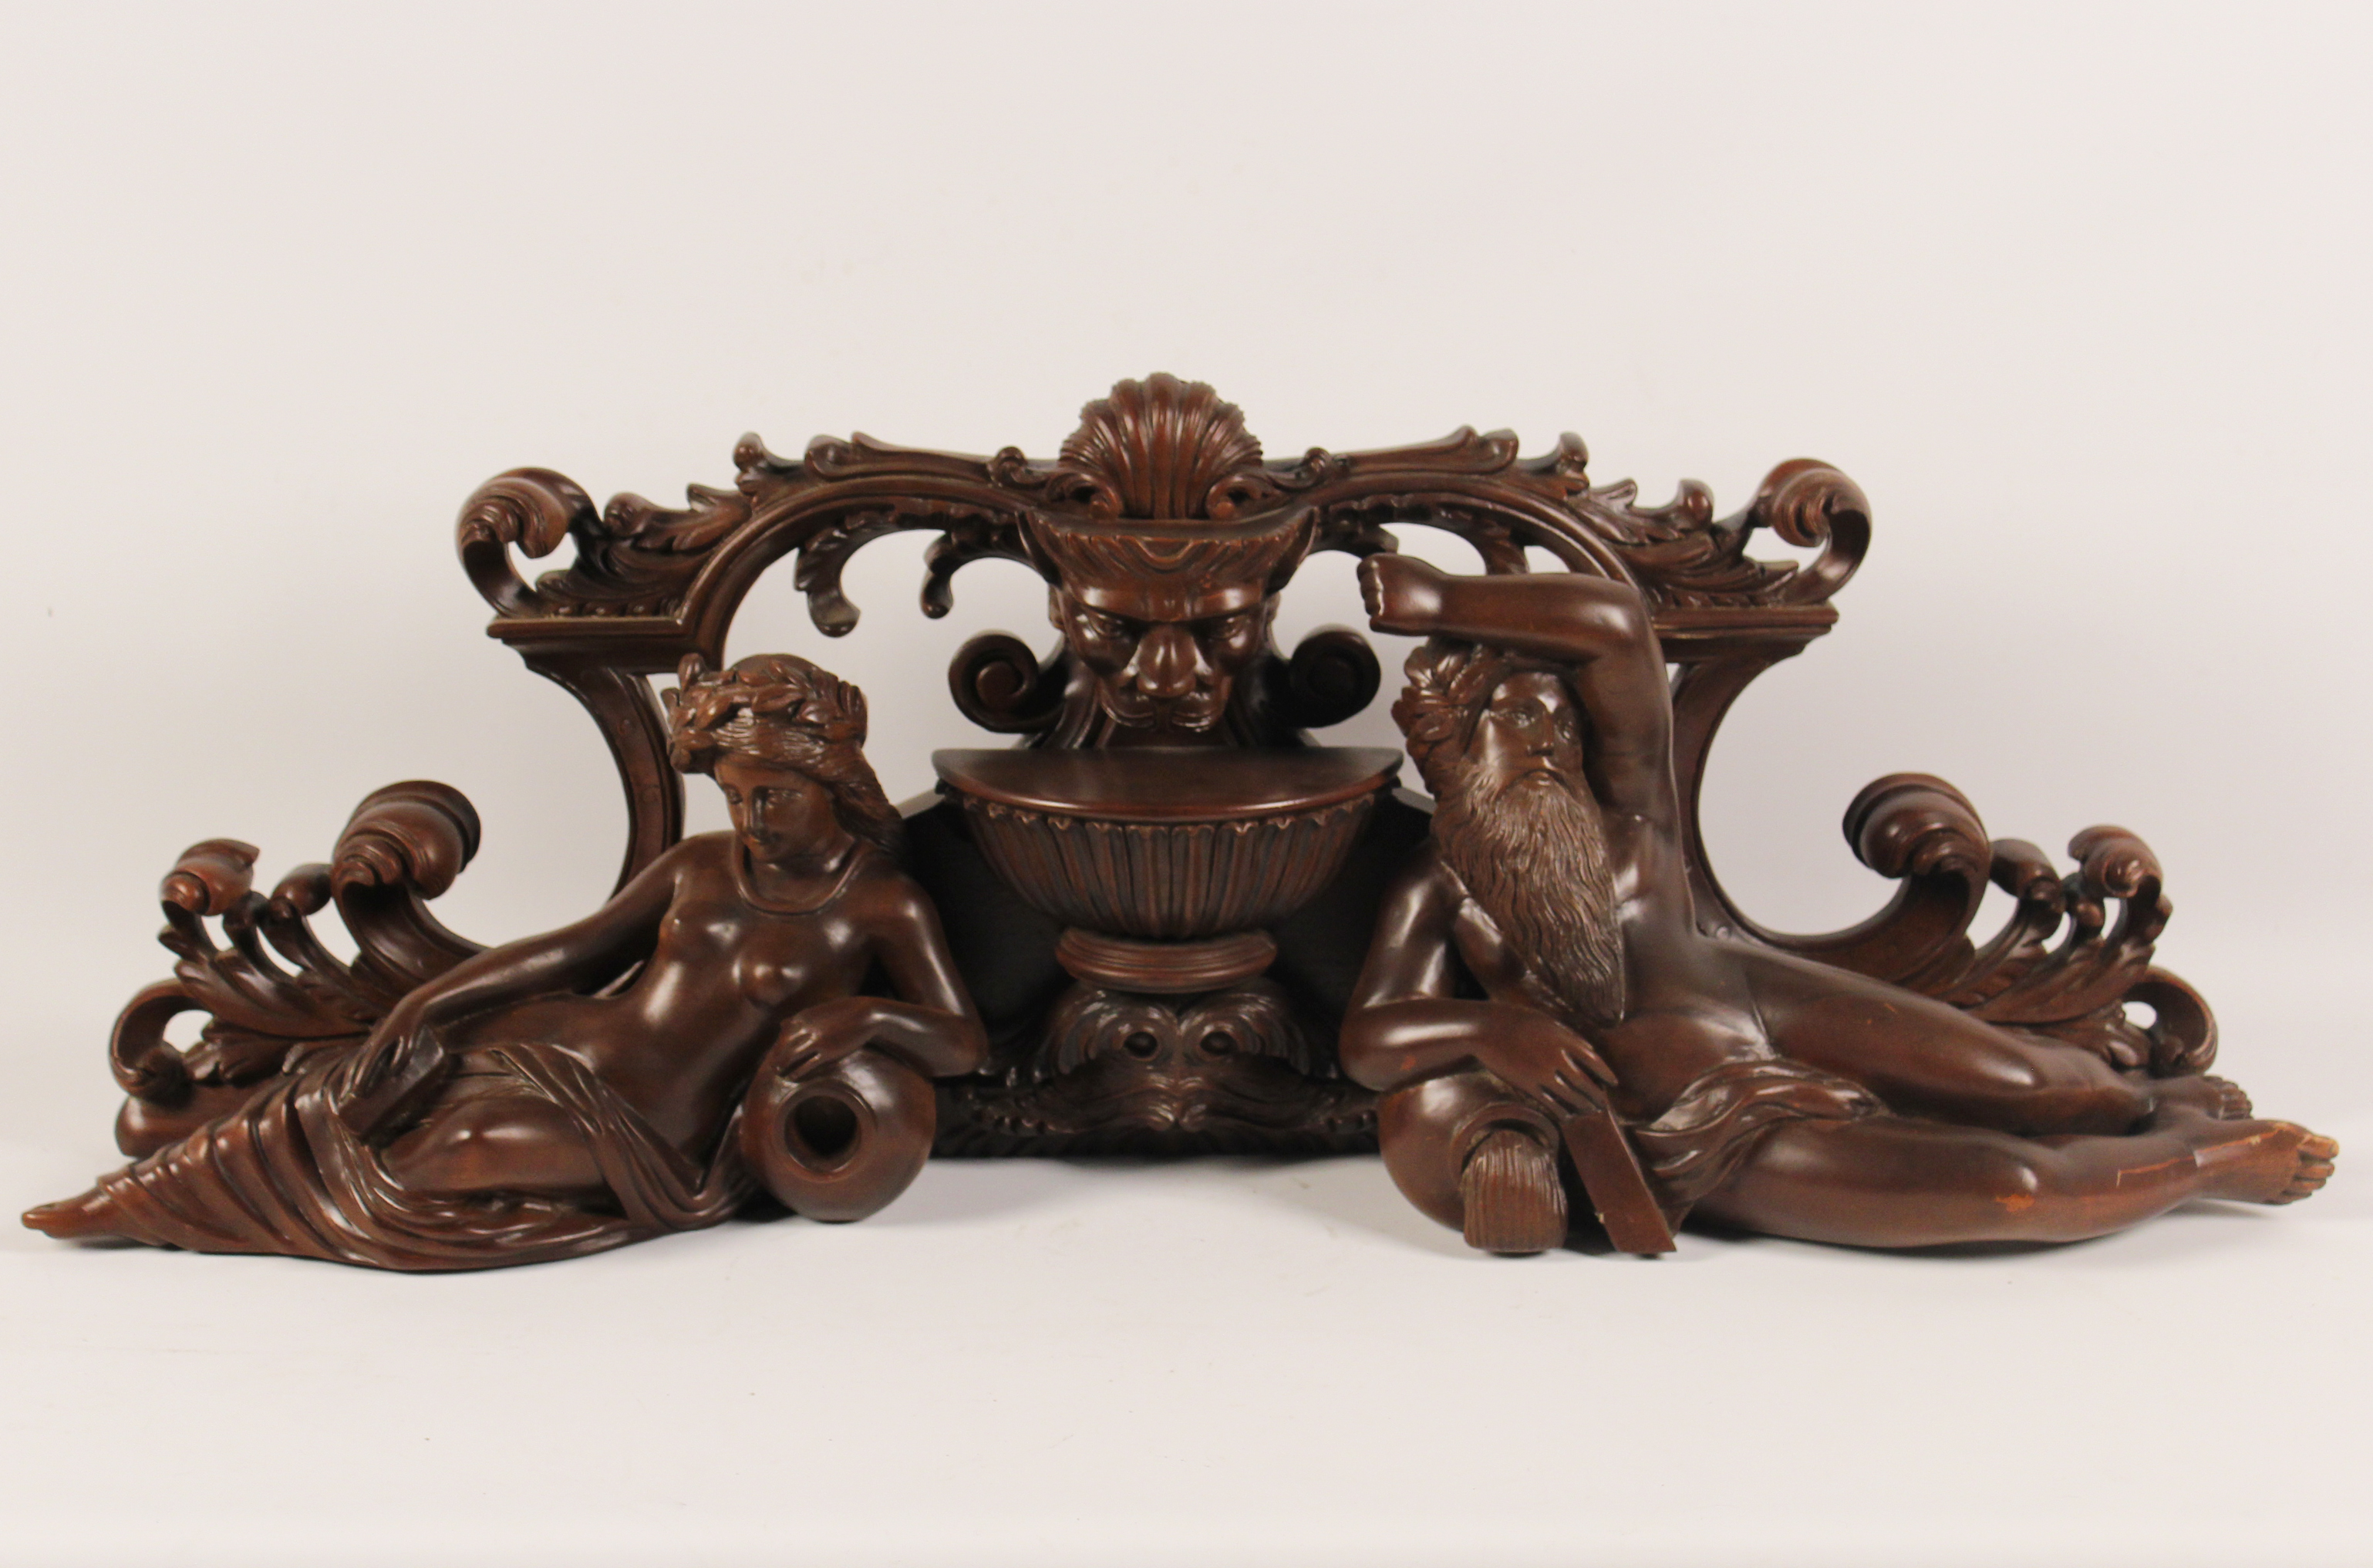 CARVED WOOD FIGURAL ARCHITECTURAL